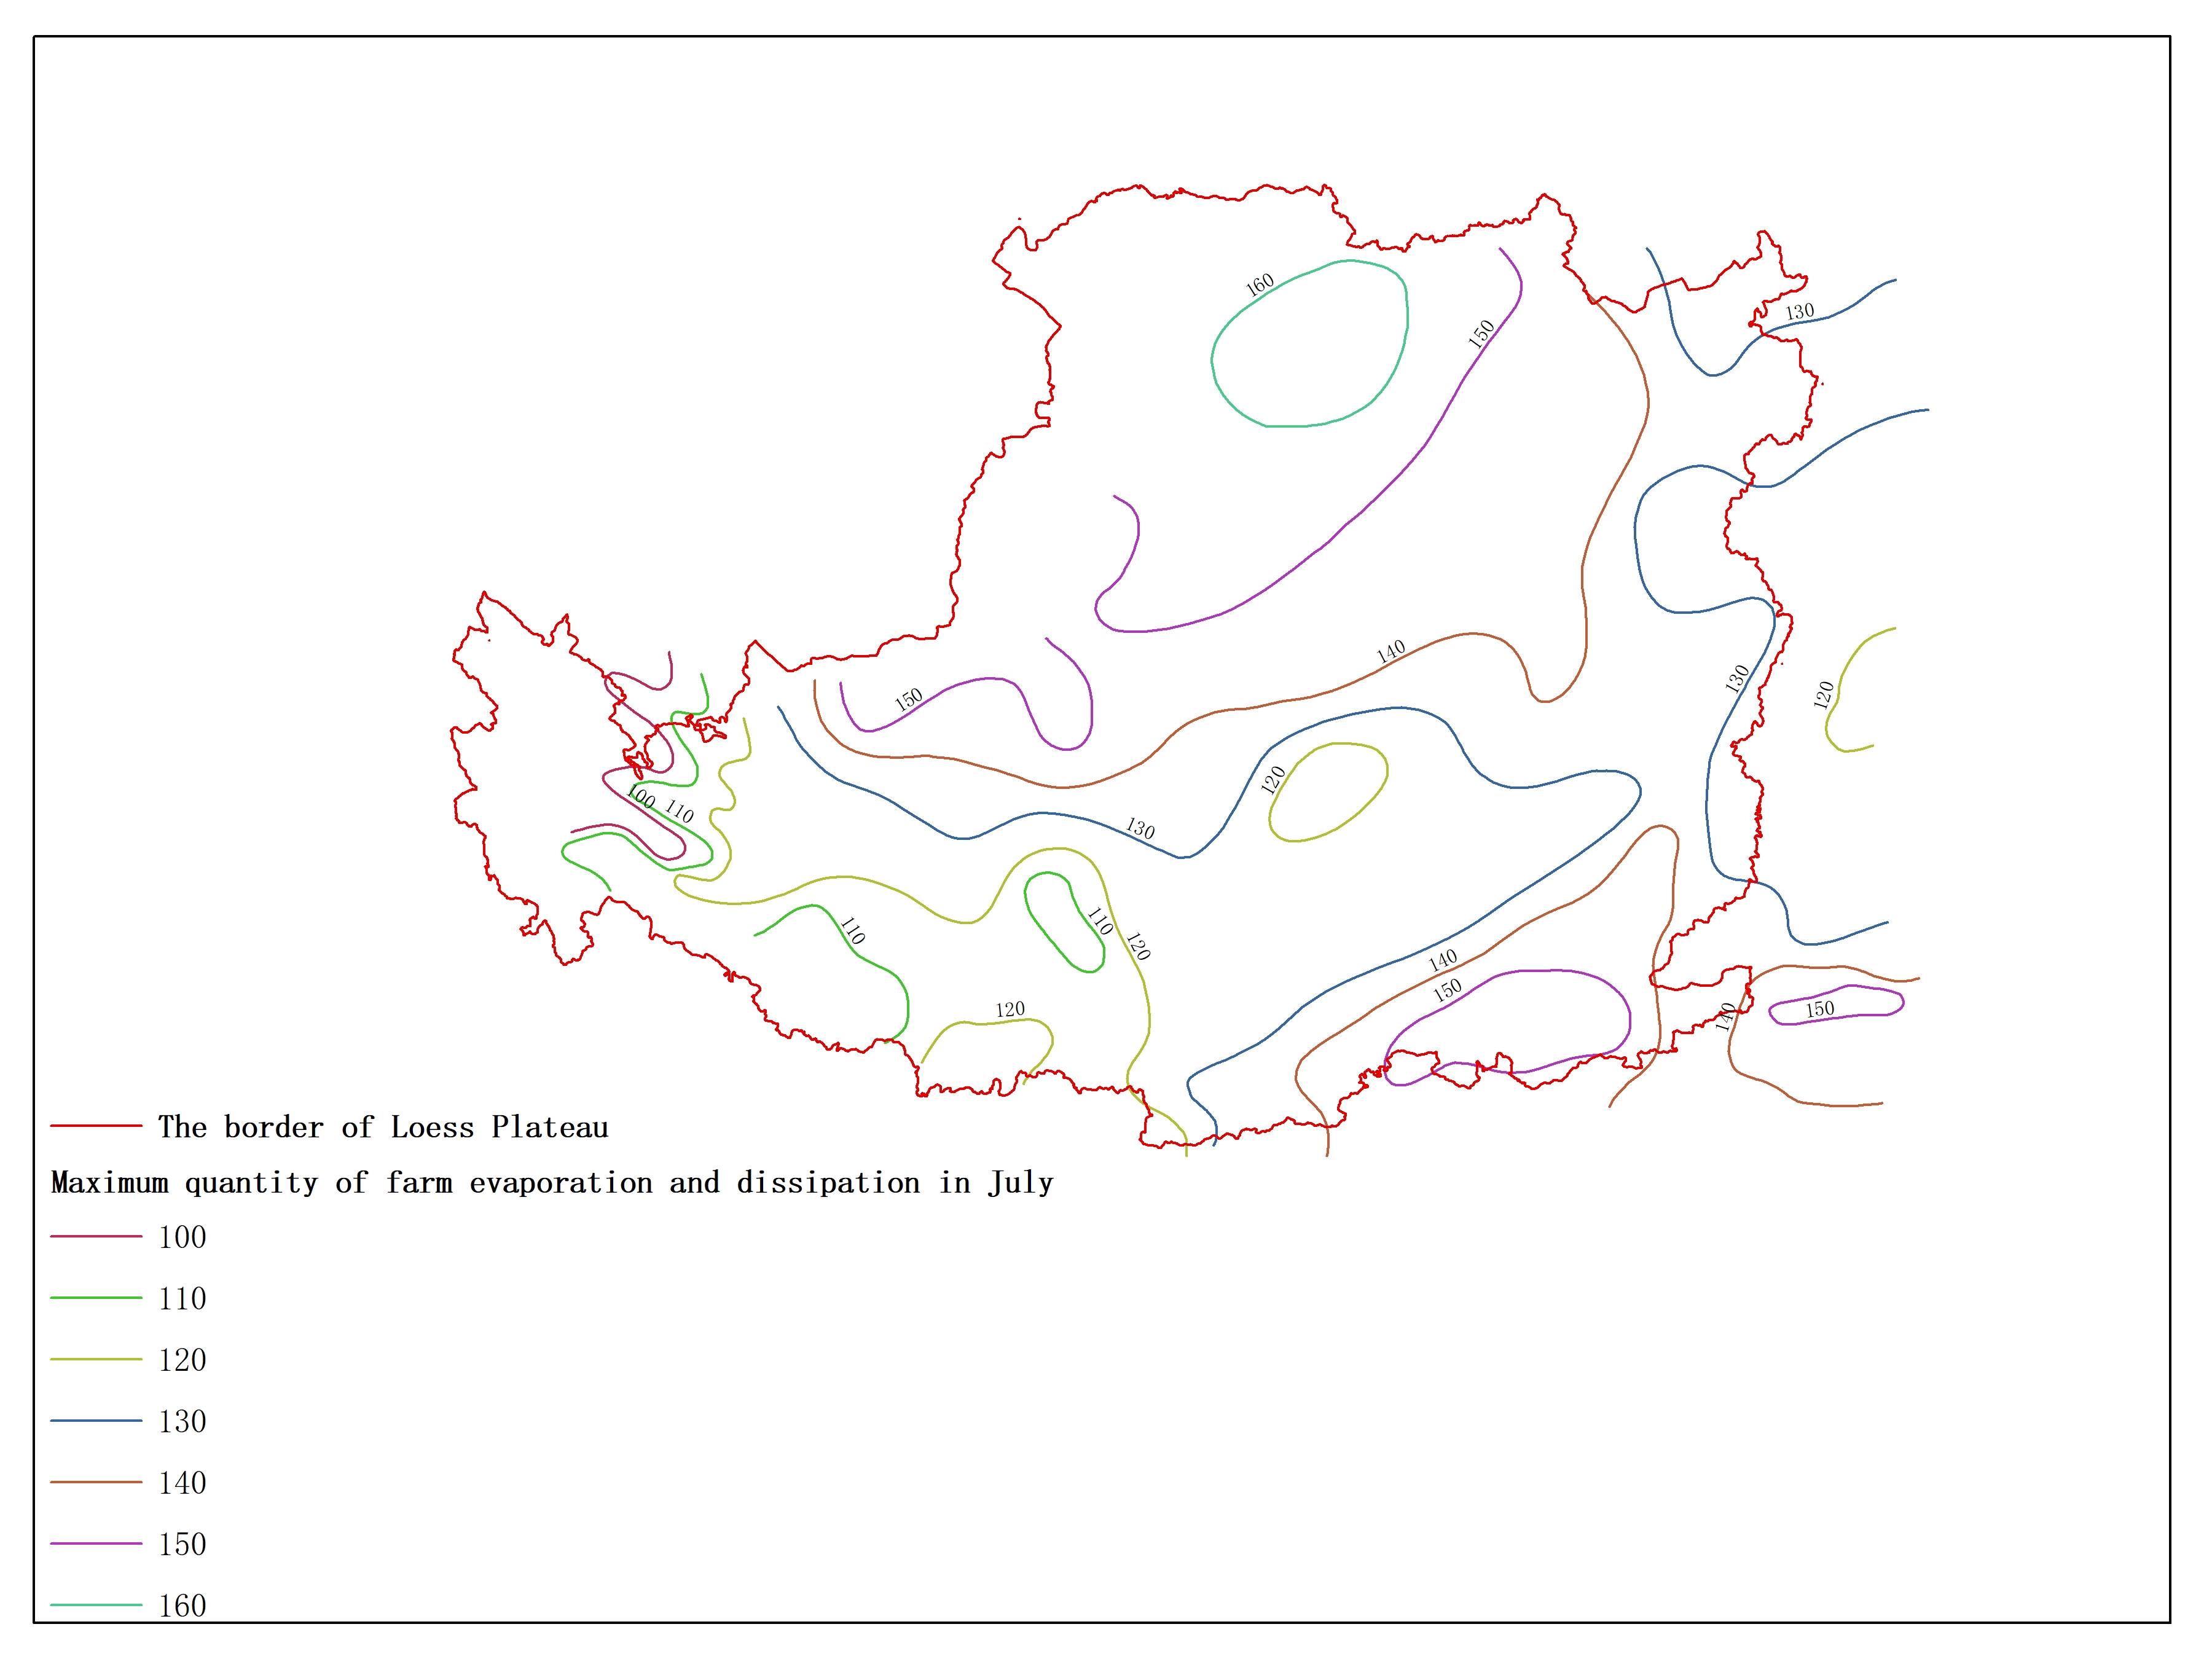 Agricultural climate resource atlas of Loess Plateau-Maximum quantity of farm evaporation and dissipation in July